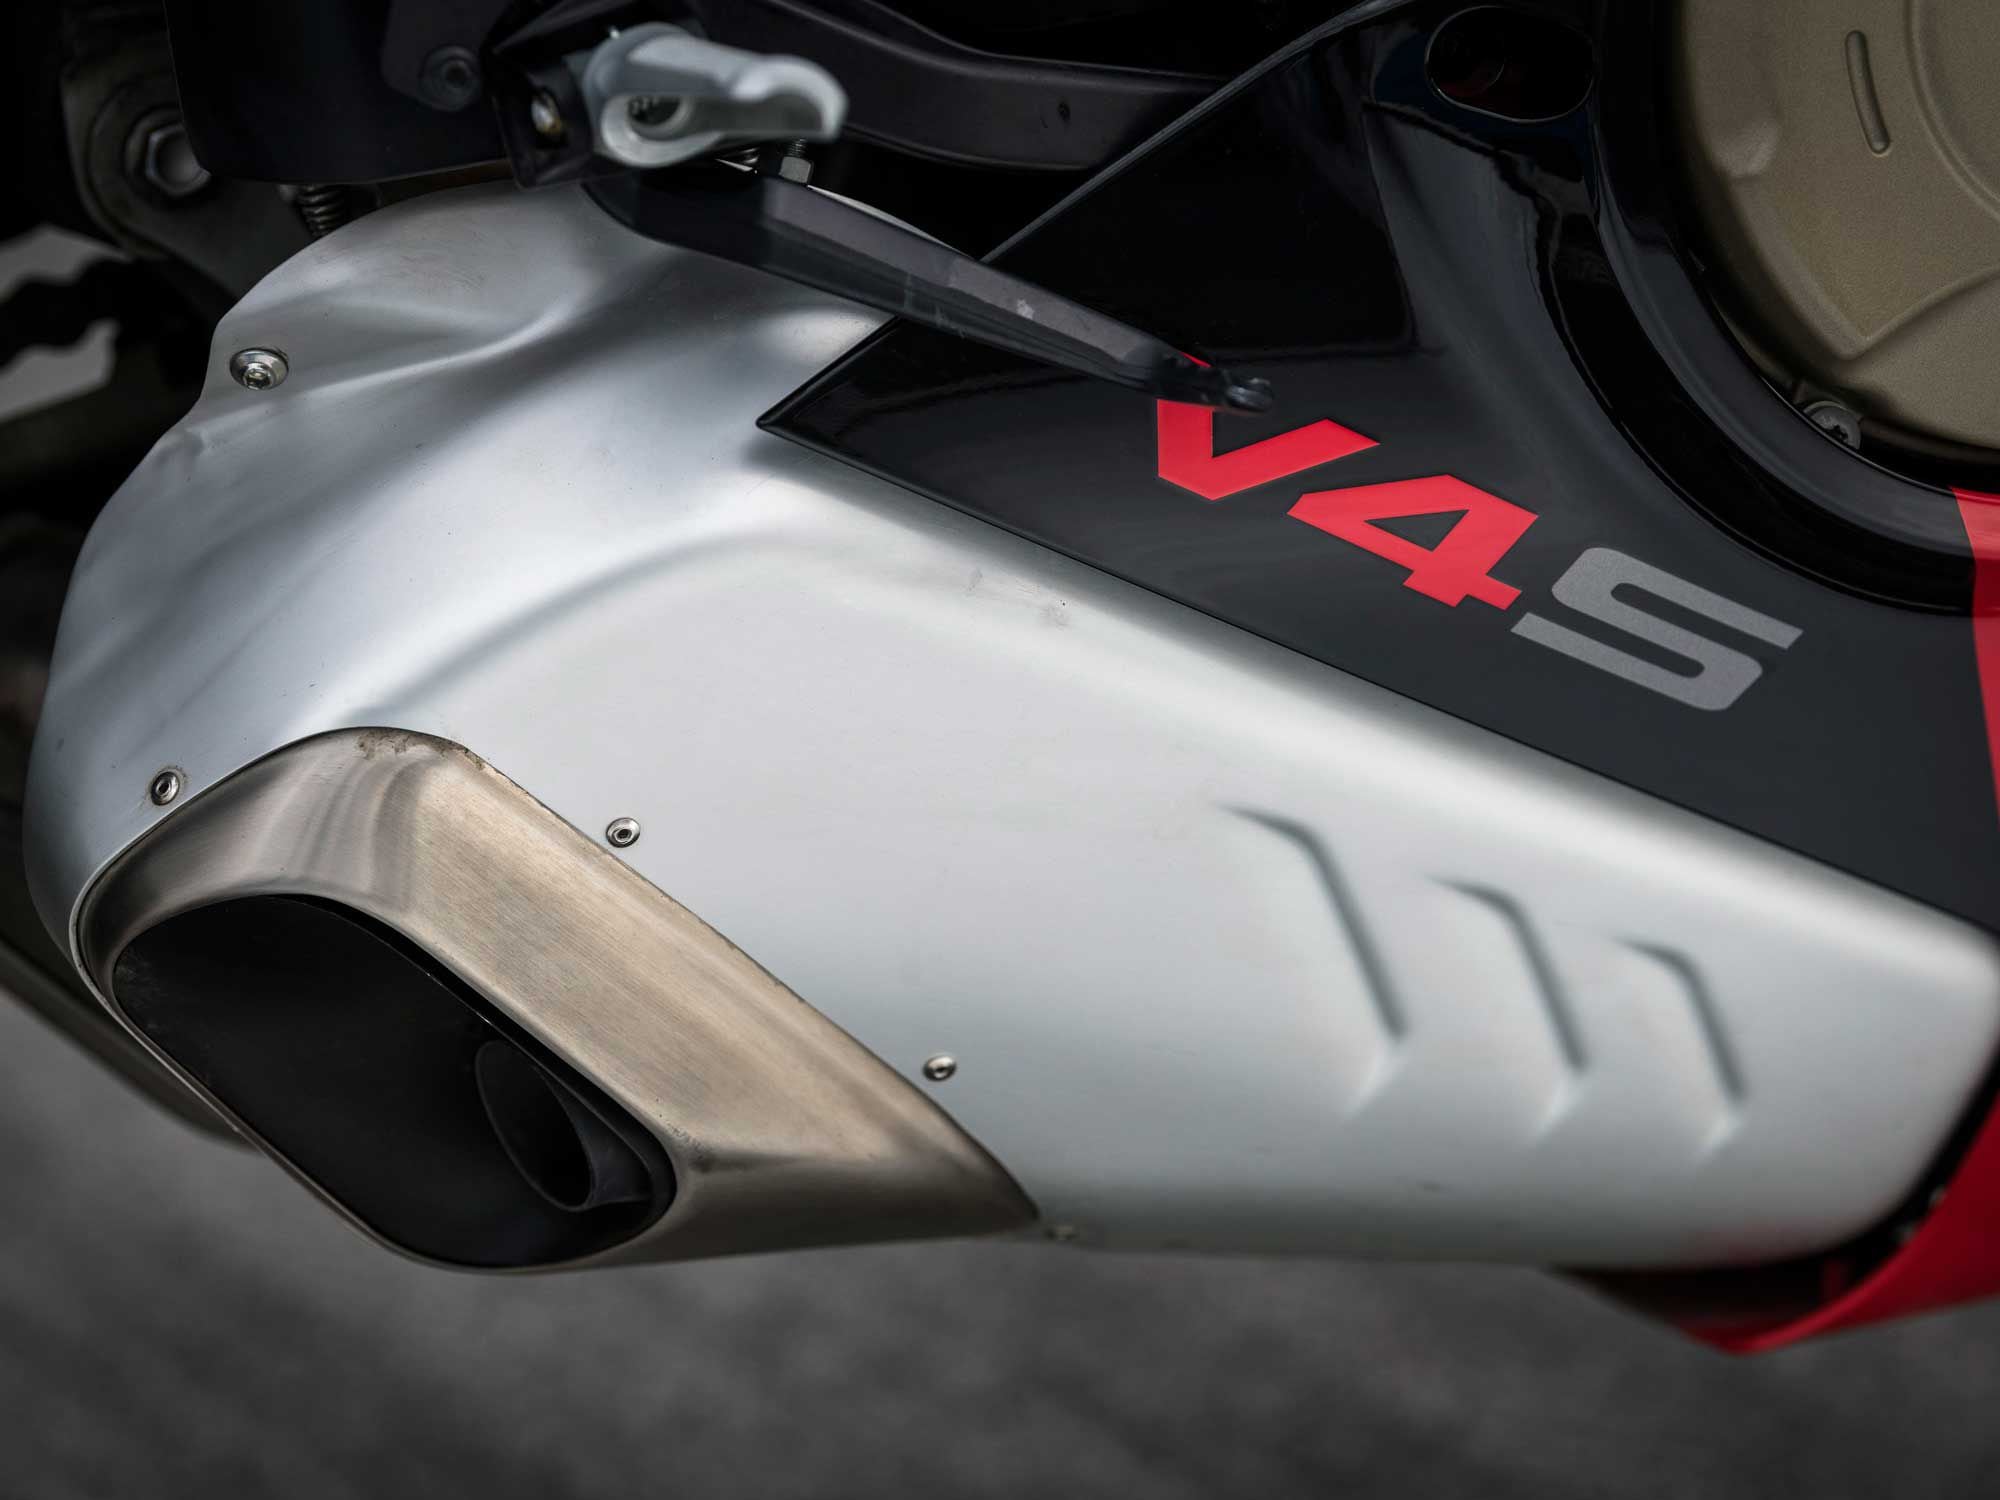 The exhaust pipe outlet was increased to reduce back pressure. Ducati says the engine is good for 90.6 pound-feet of torque at 11,000 rpm and 210 hp at 12,500 rpm. This is a slight reduction from last year’s Panigale due to current Euro5 regulations.